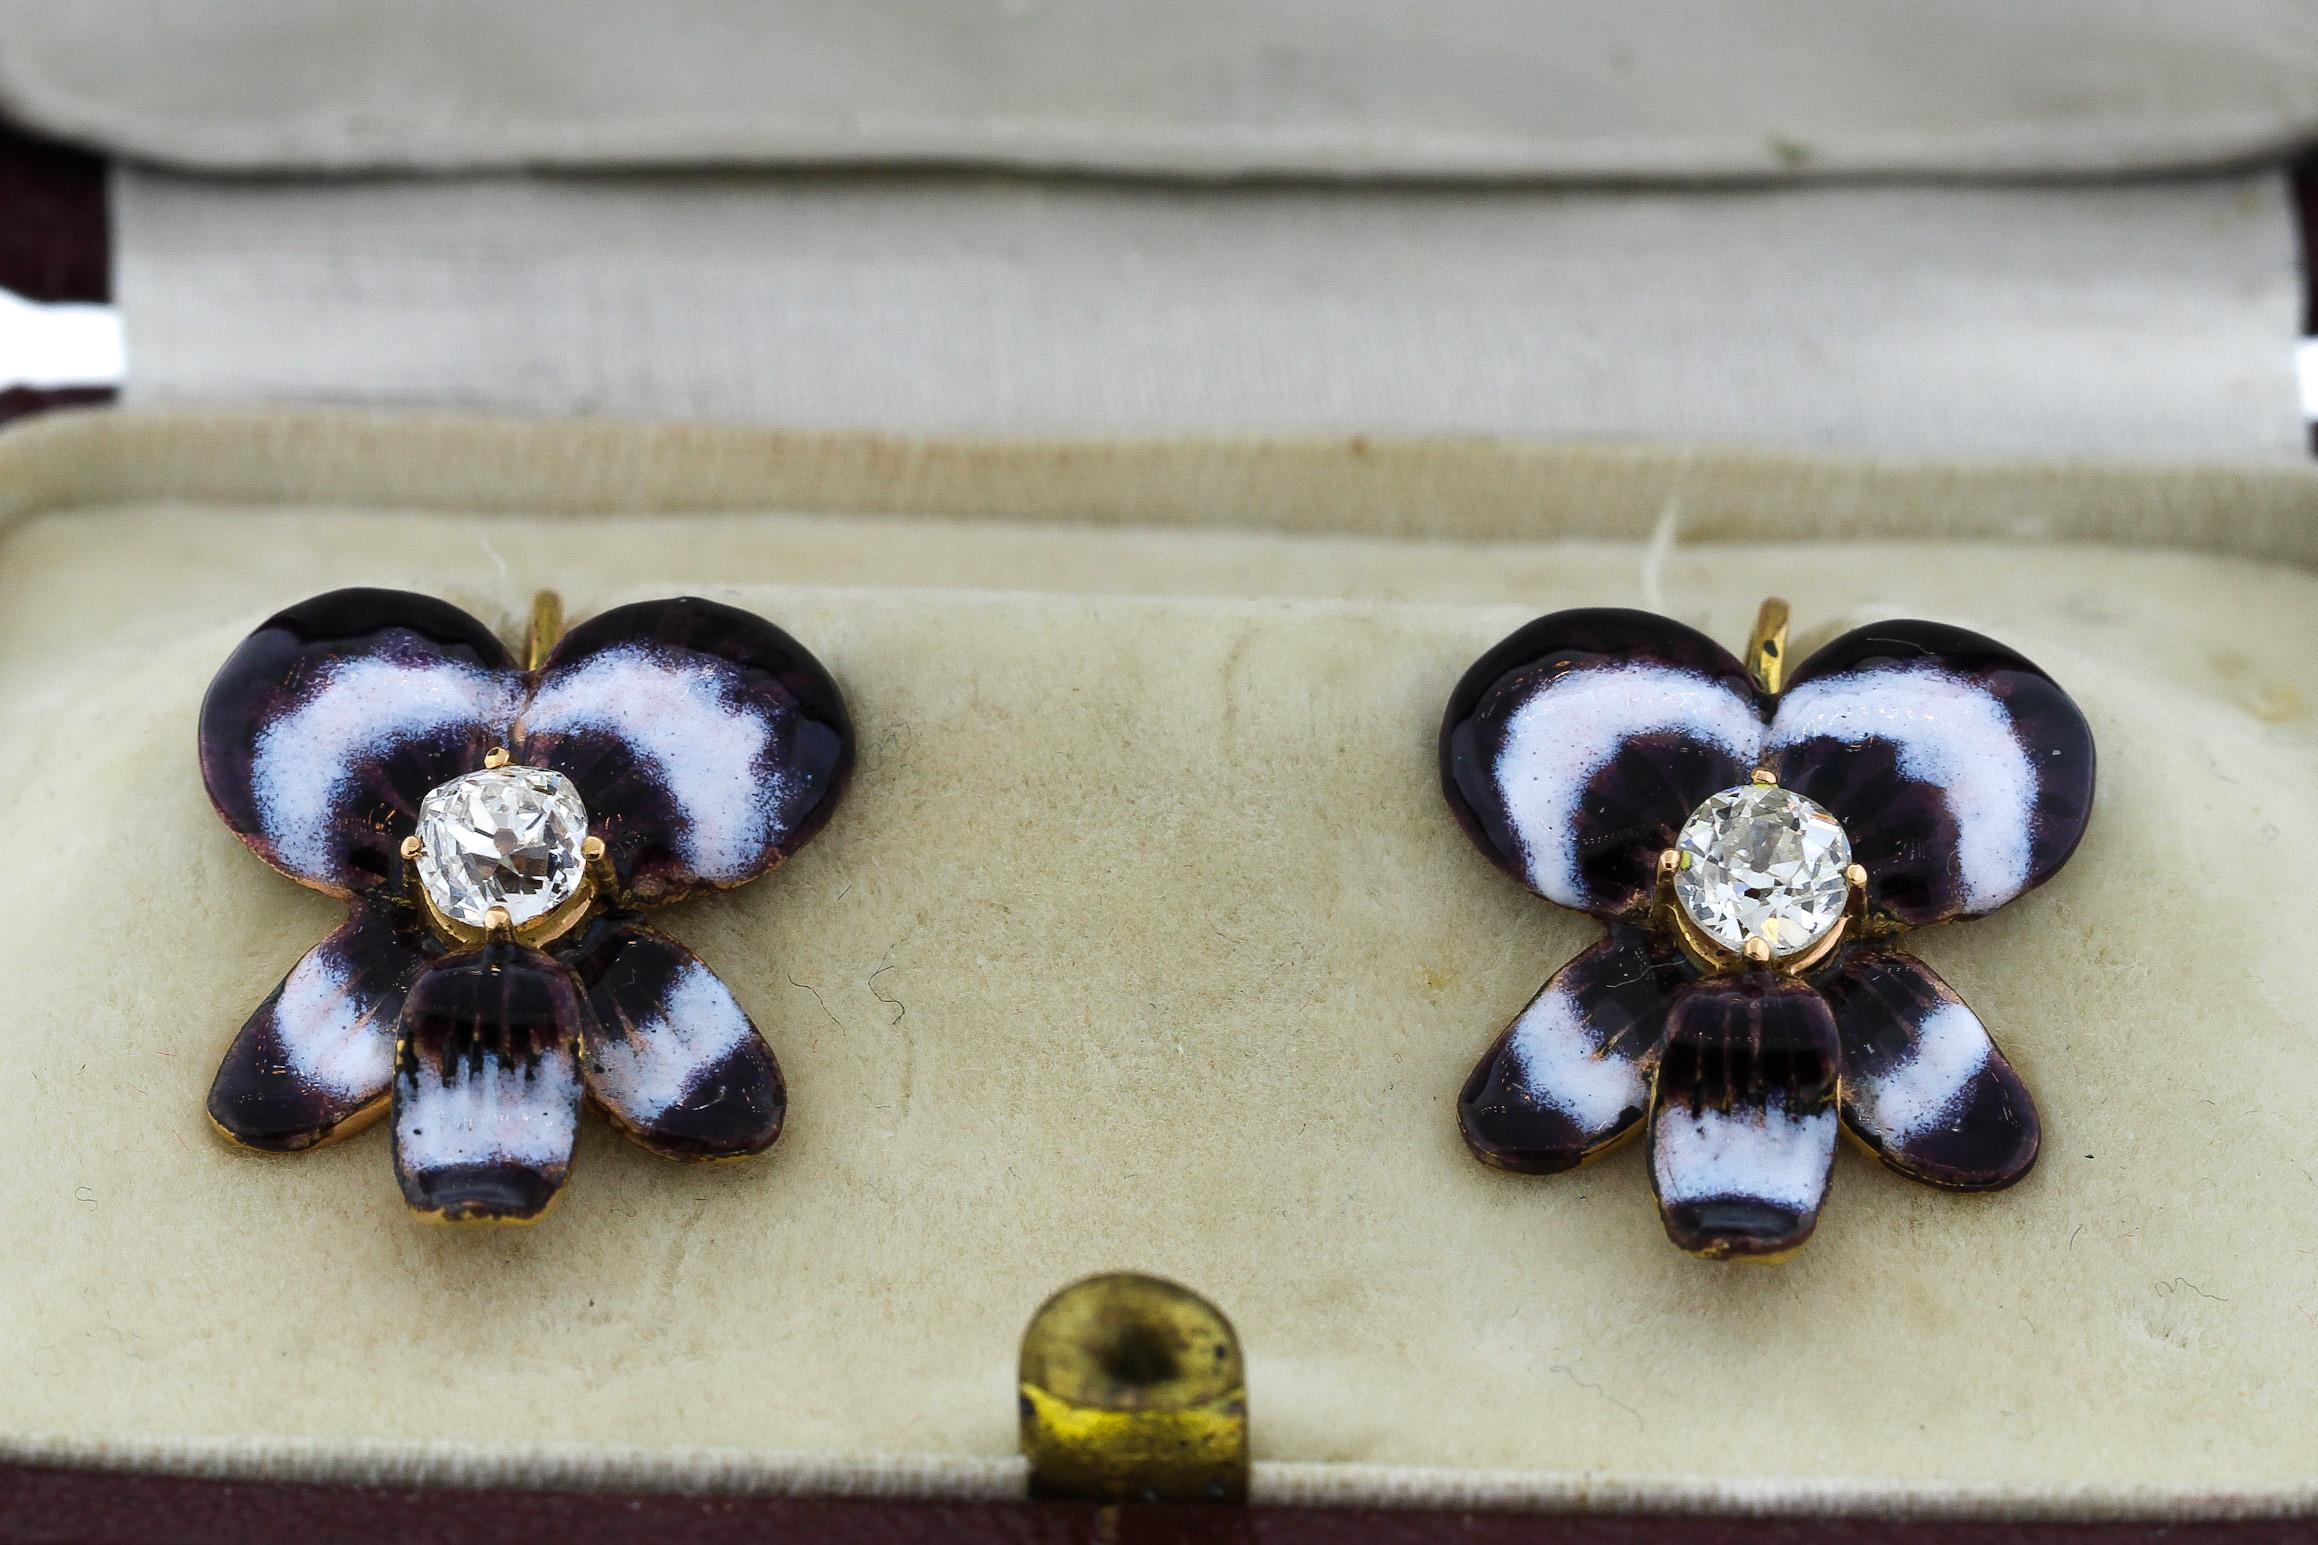 Antique late 19th century purple and white enamel pansy earrings with diamonds, circa 1890. A beautifully colored deep purple pansy with white accents surround an Old European cut diamond. The diamond weighs approximately 0.35 carats and is graded